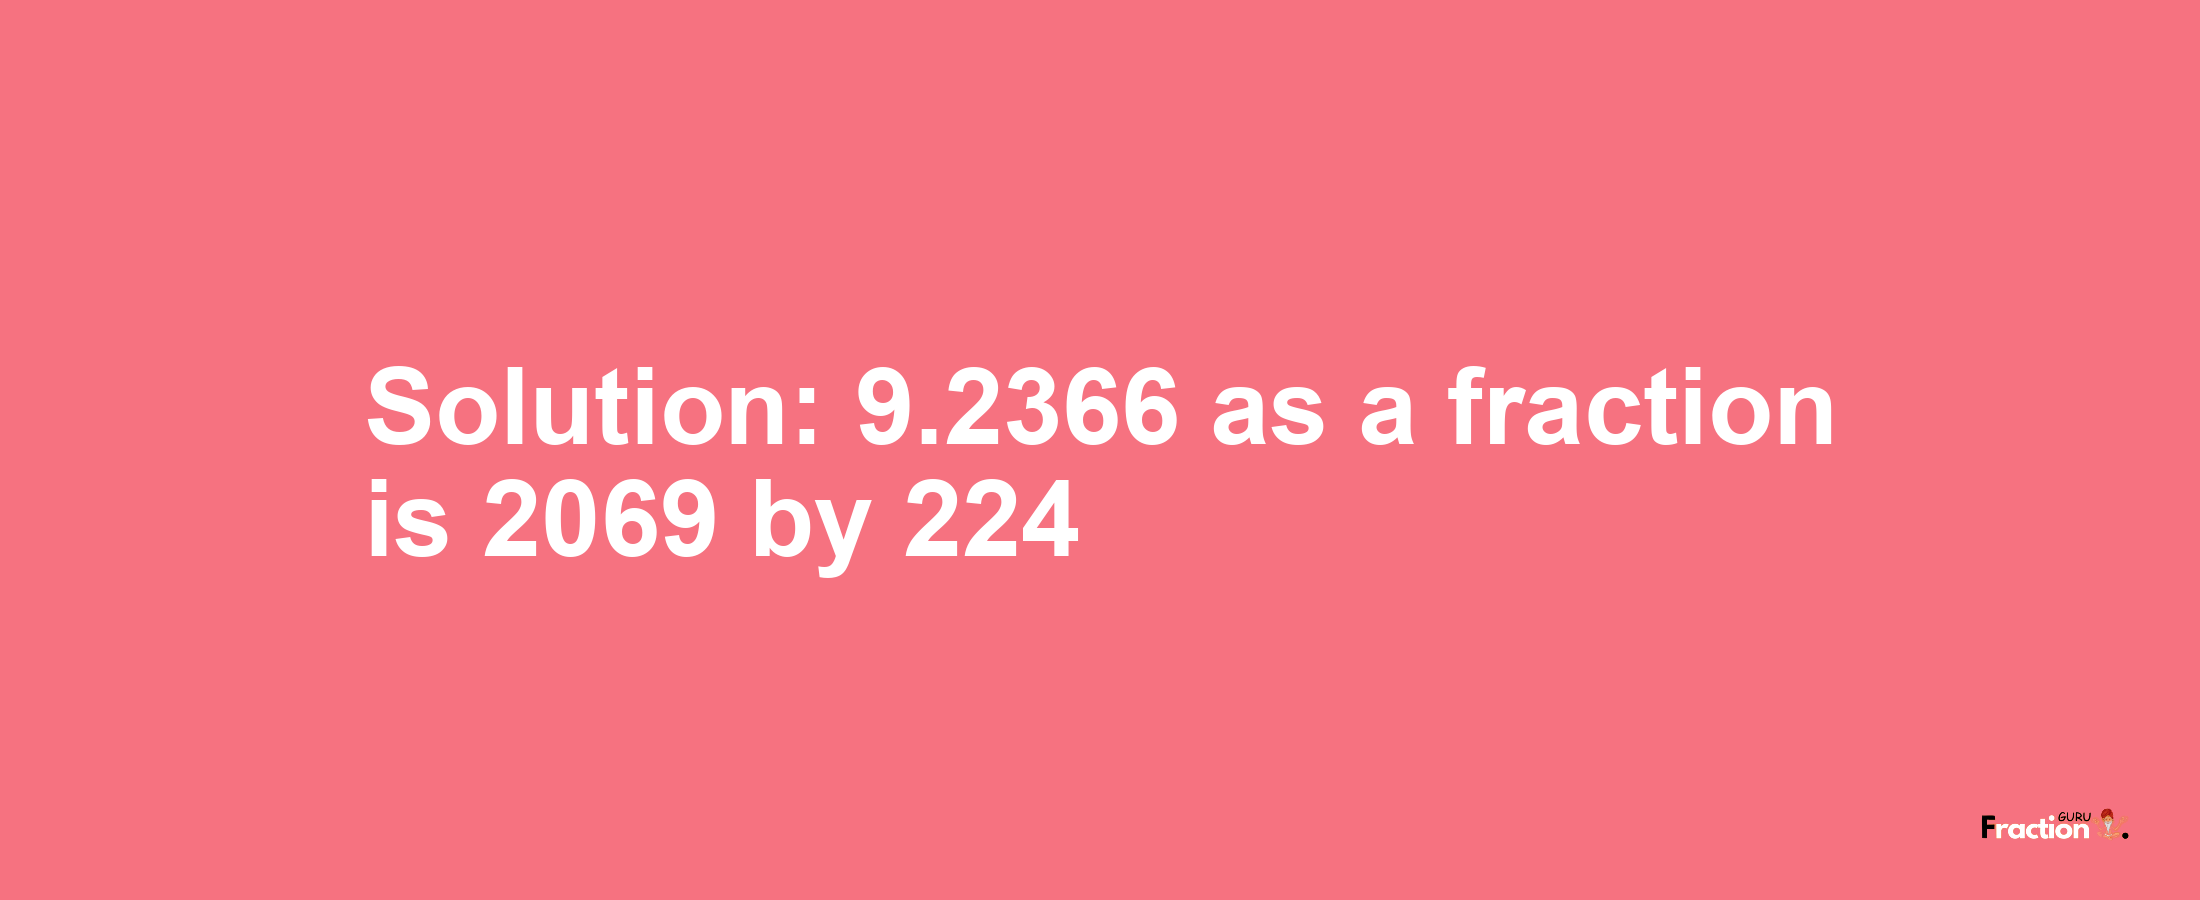 Solution:9.2366 as a fraction is 2069/224